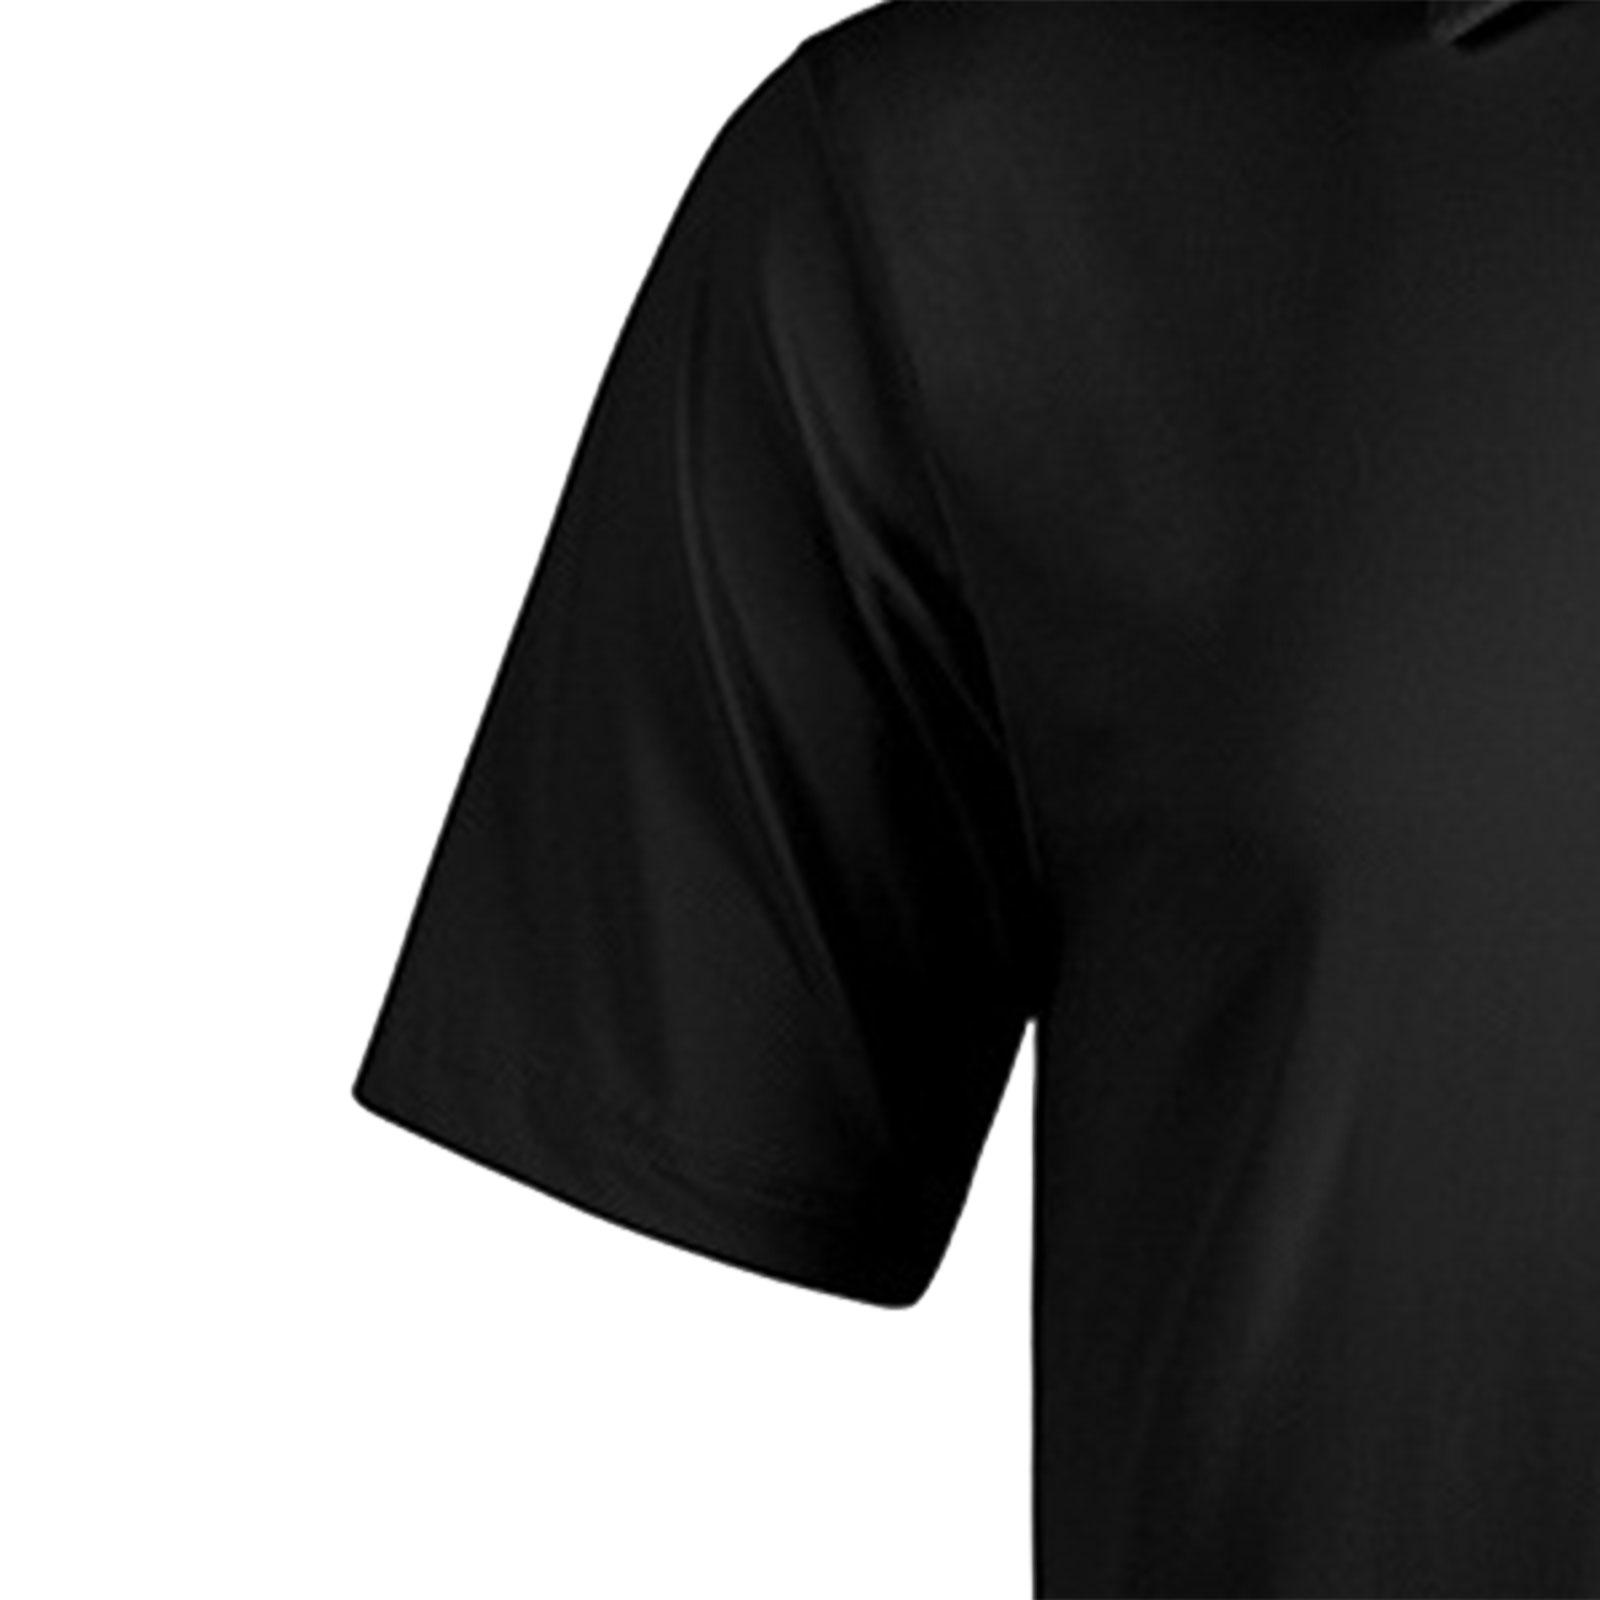 Mens Short Sleeve T Shirt Casual Tee Shirt for Business Hiking Daily Leisure 2XL Black